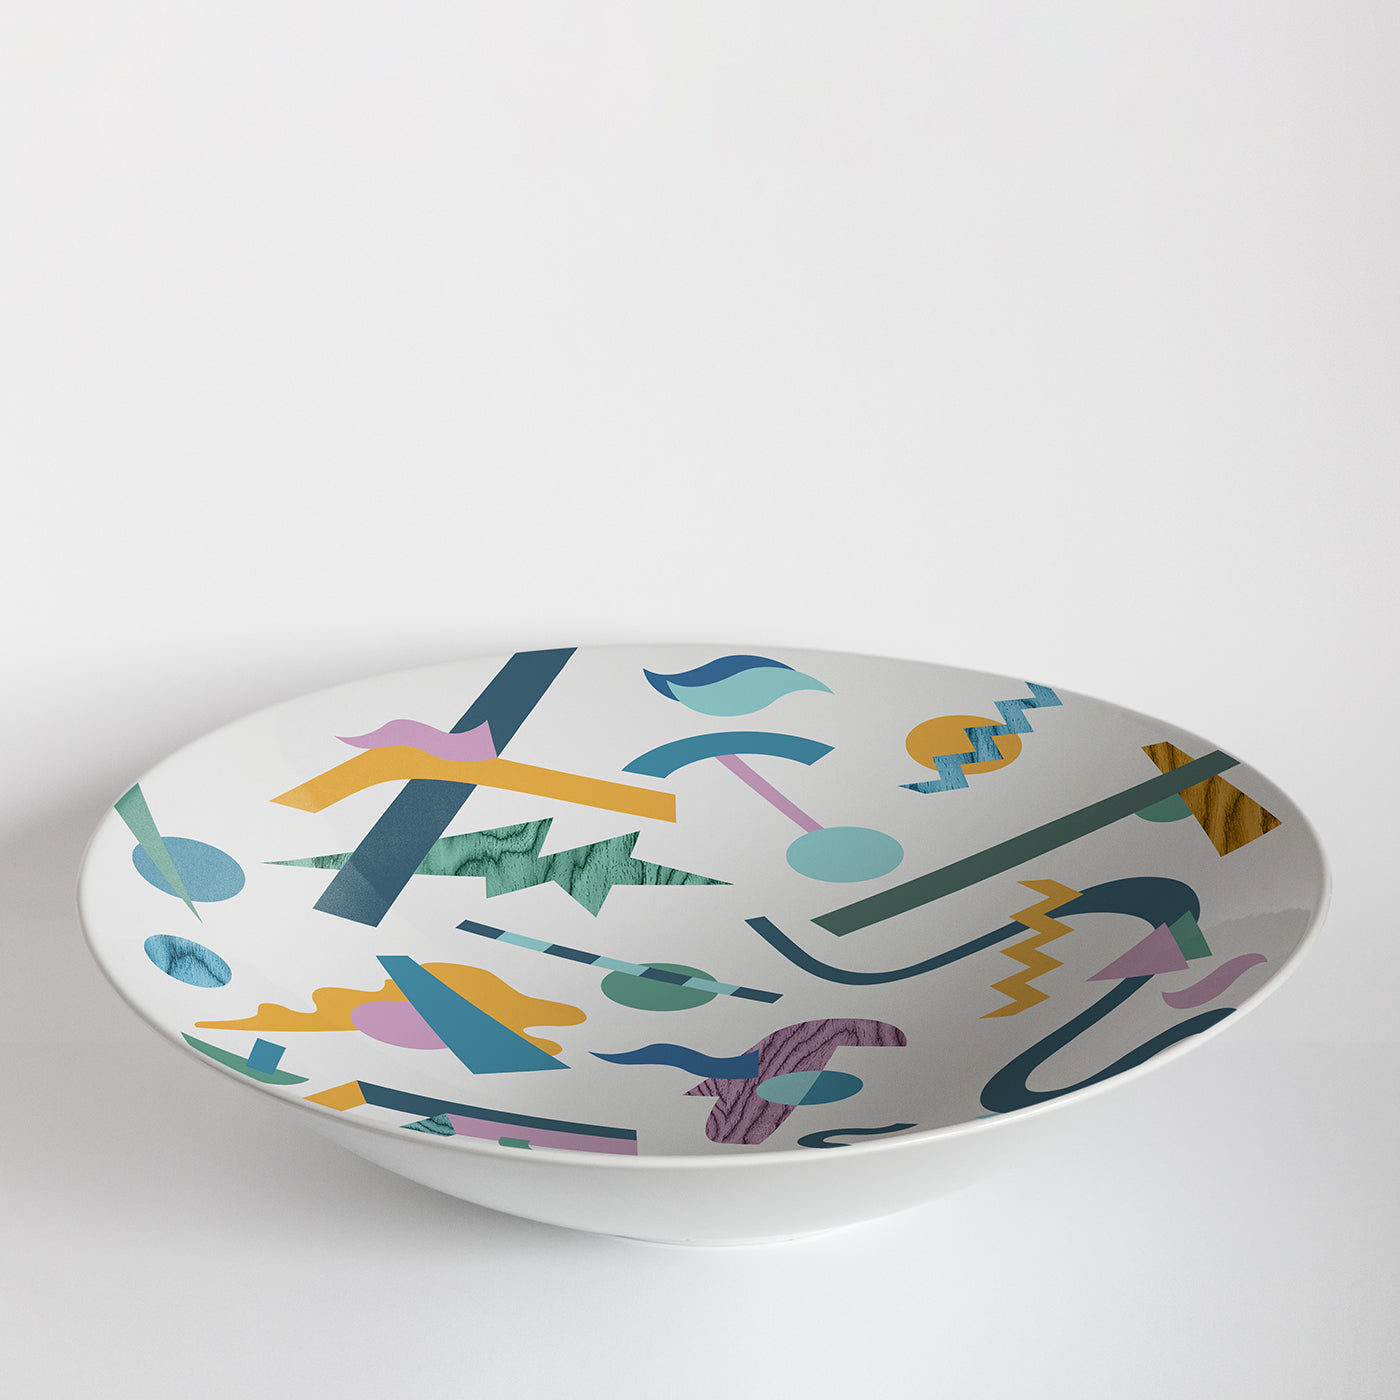 Alchimie Large Porcelain Bowl with Abstract Decor - Alternative view 1